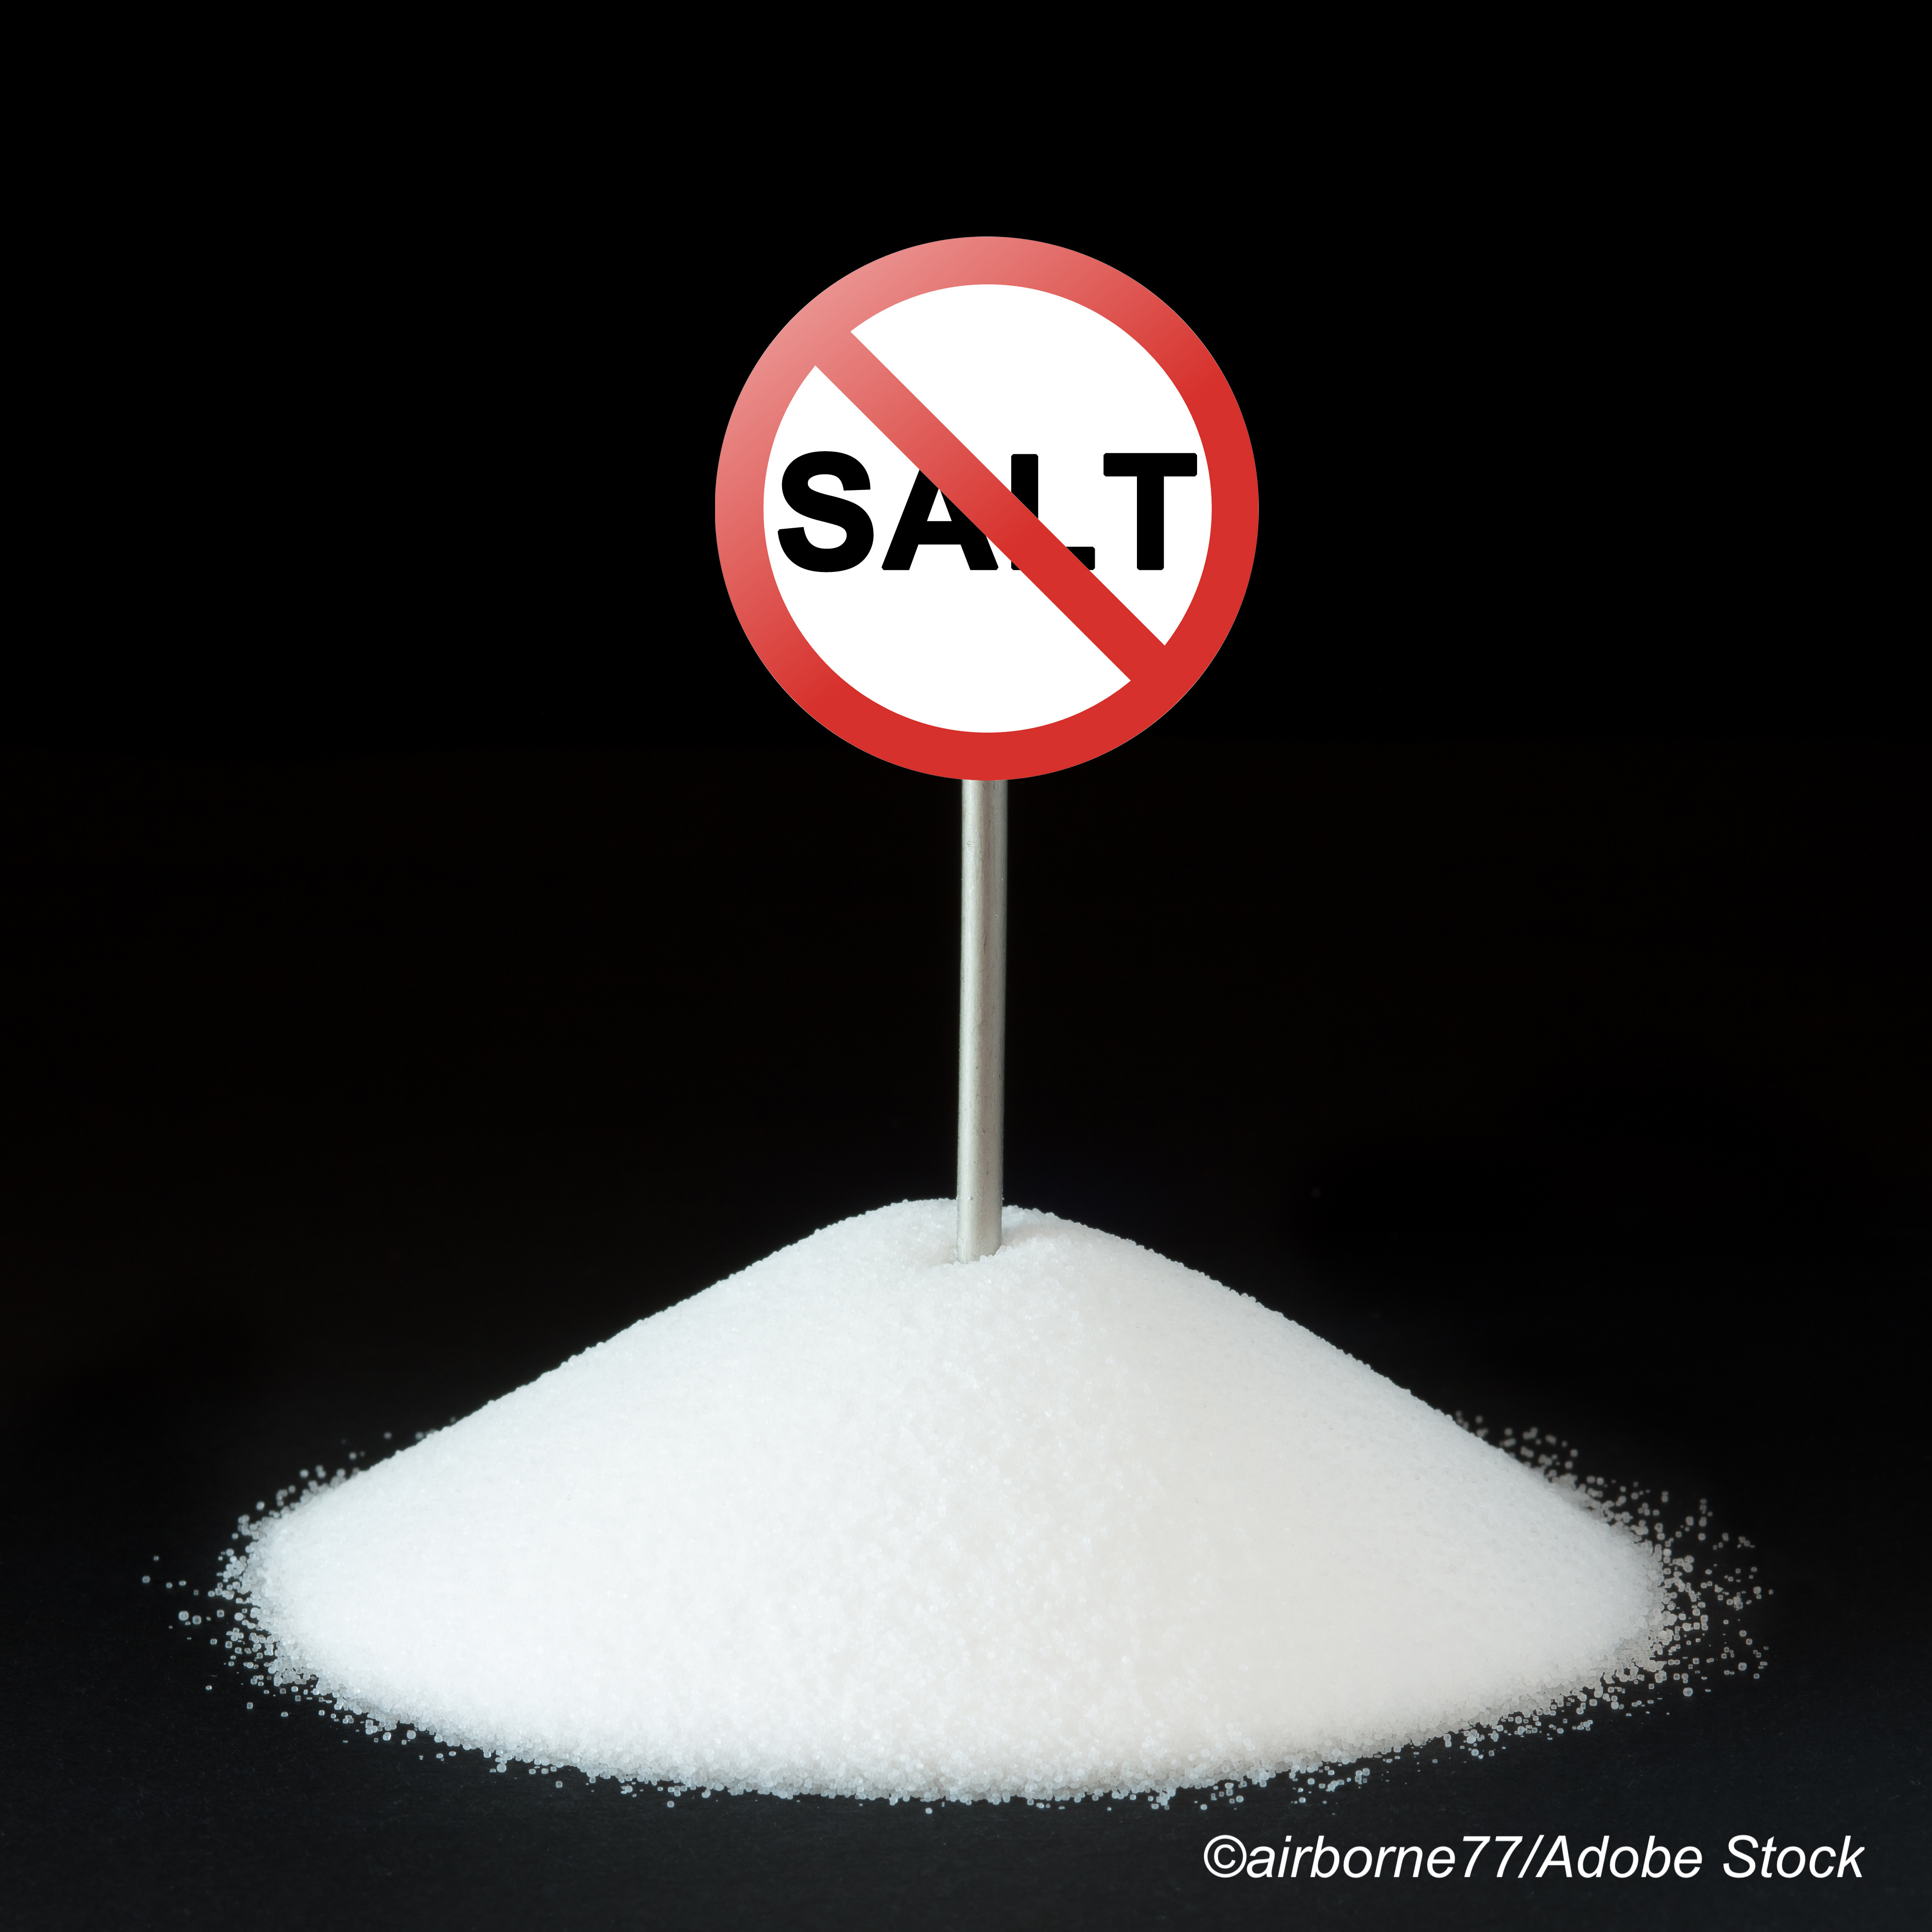 ESC: Study Confirms Cutting Salt Intake Can Reduce Strokes and Heart Attacks